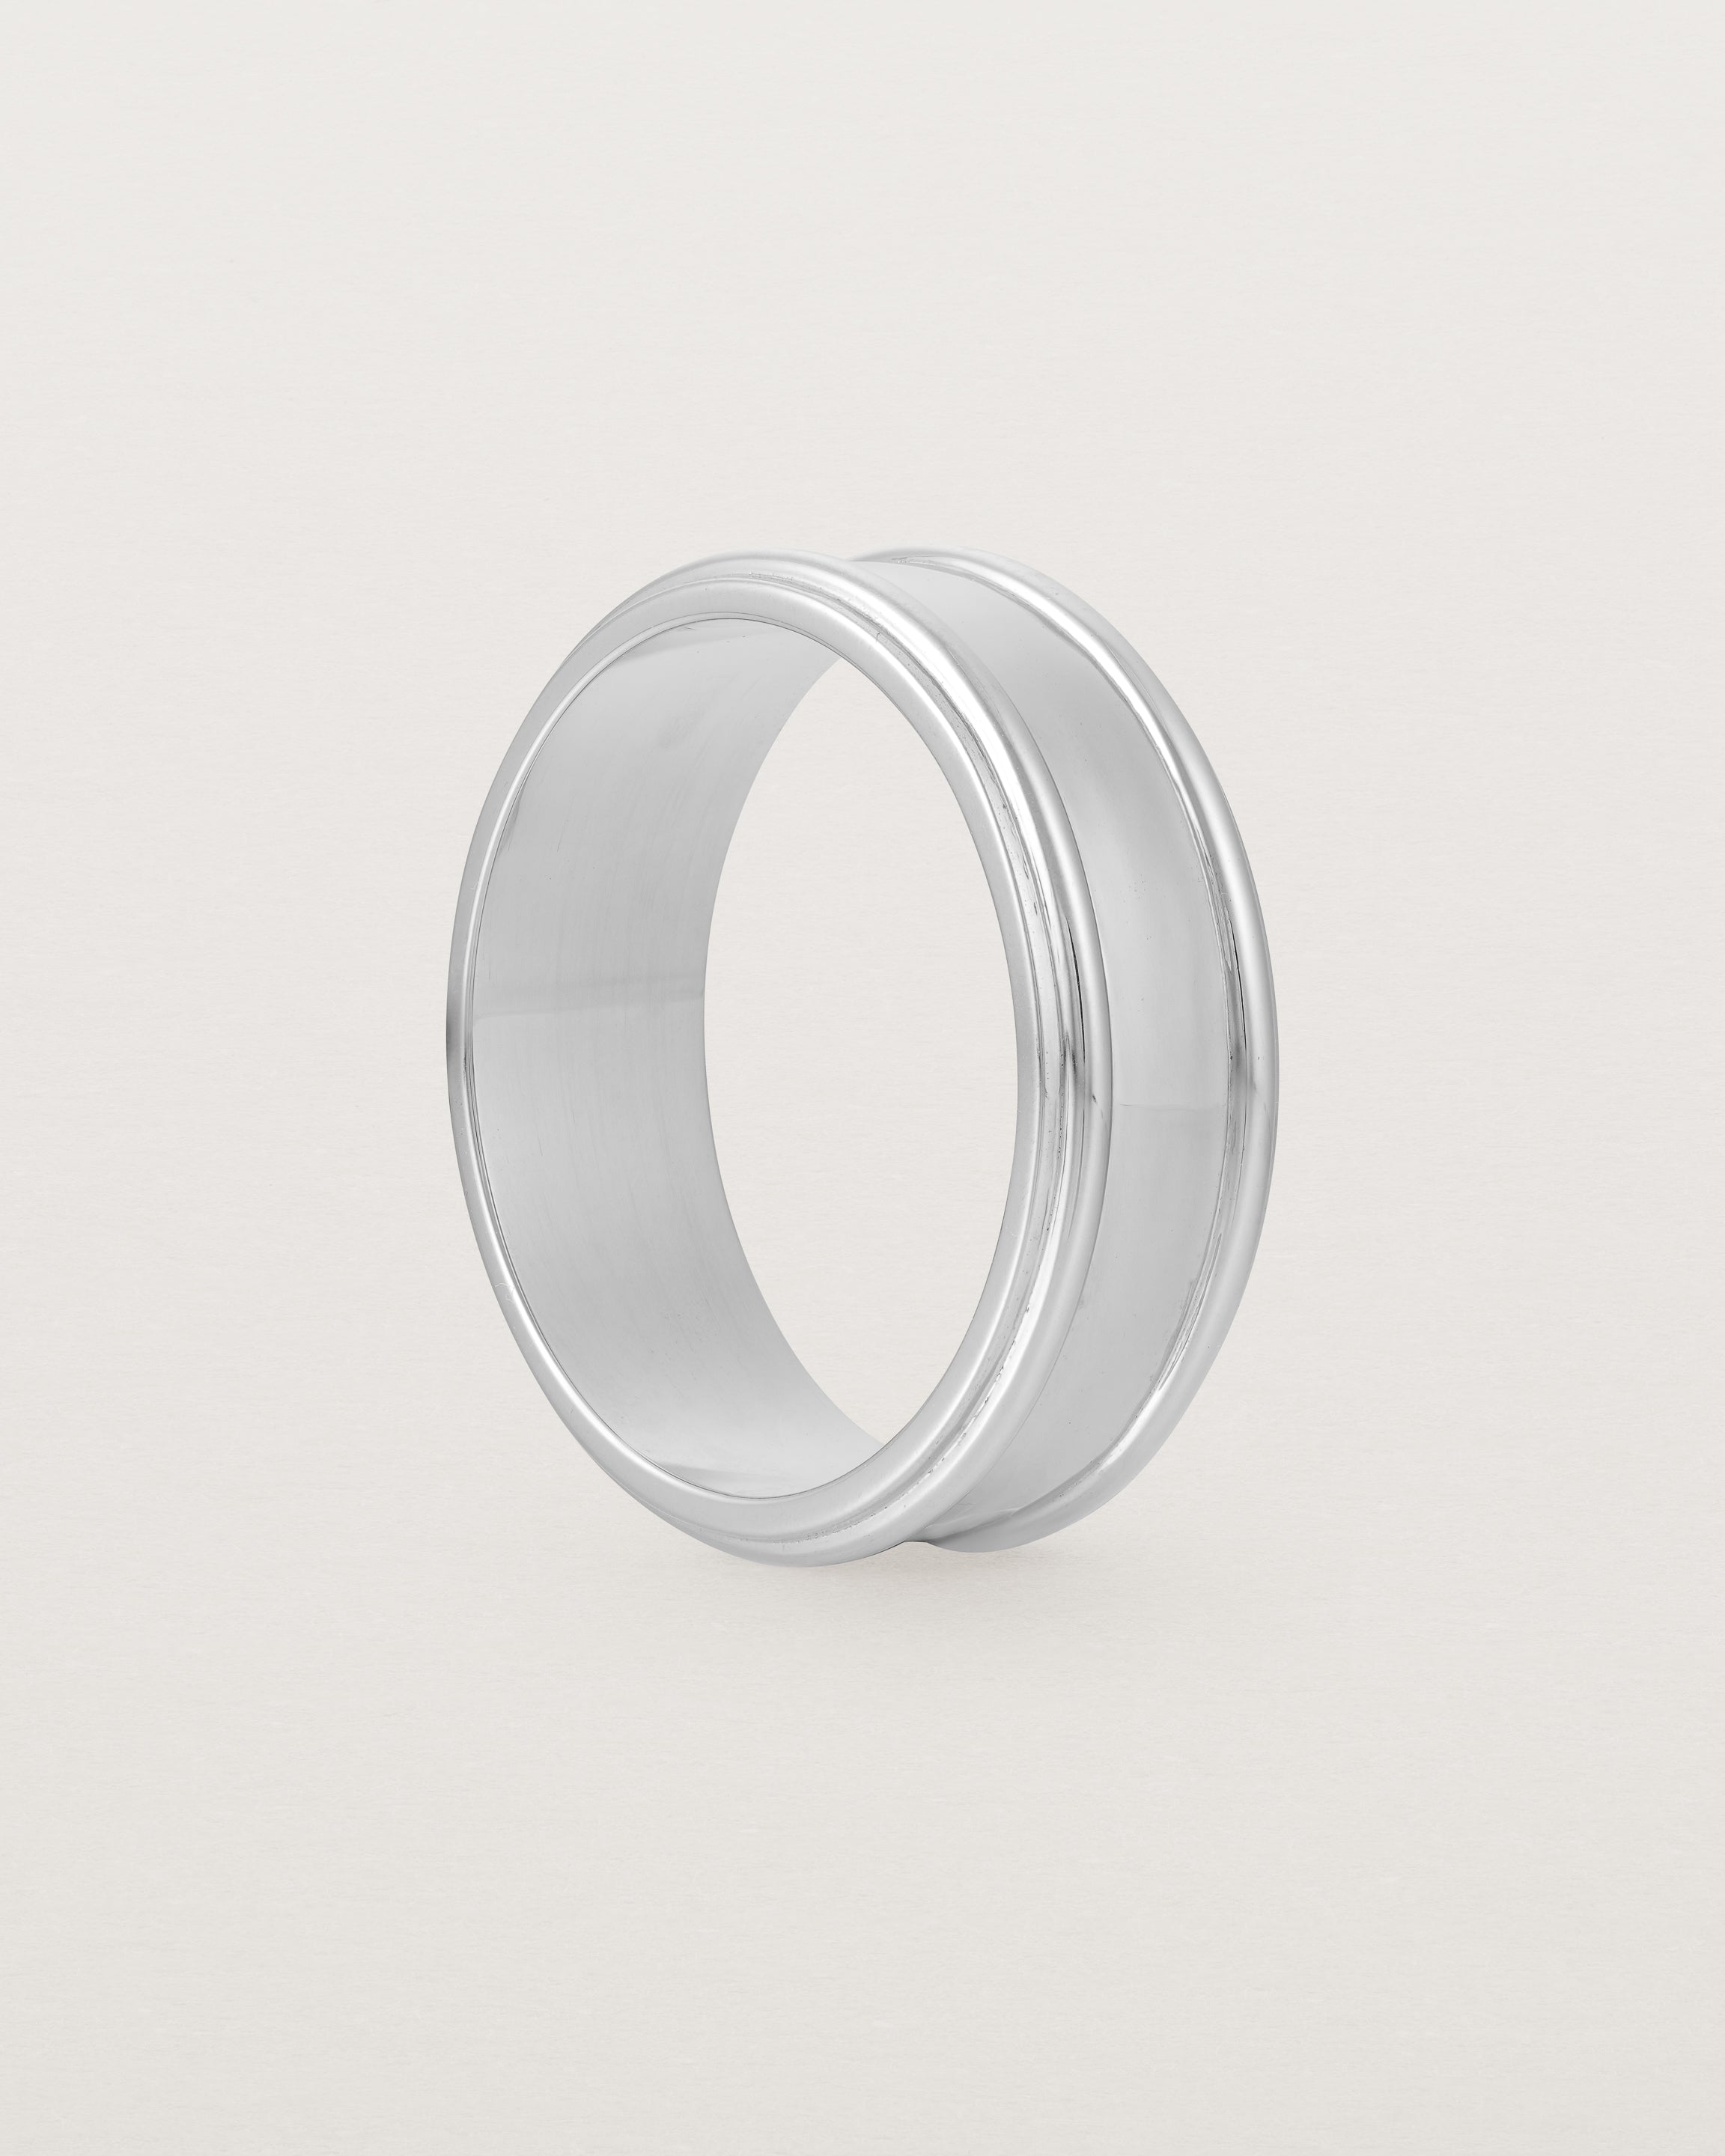 Standing view of the Border Wedding Ring | 7mm | White Gold.